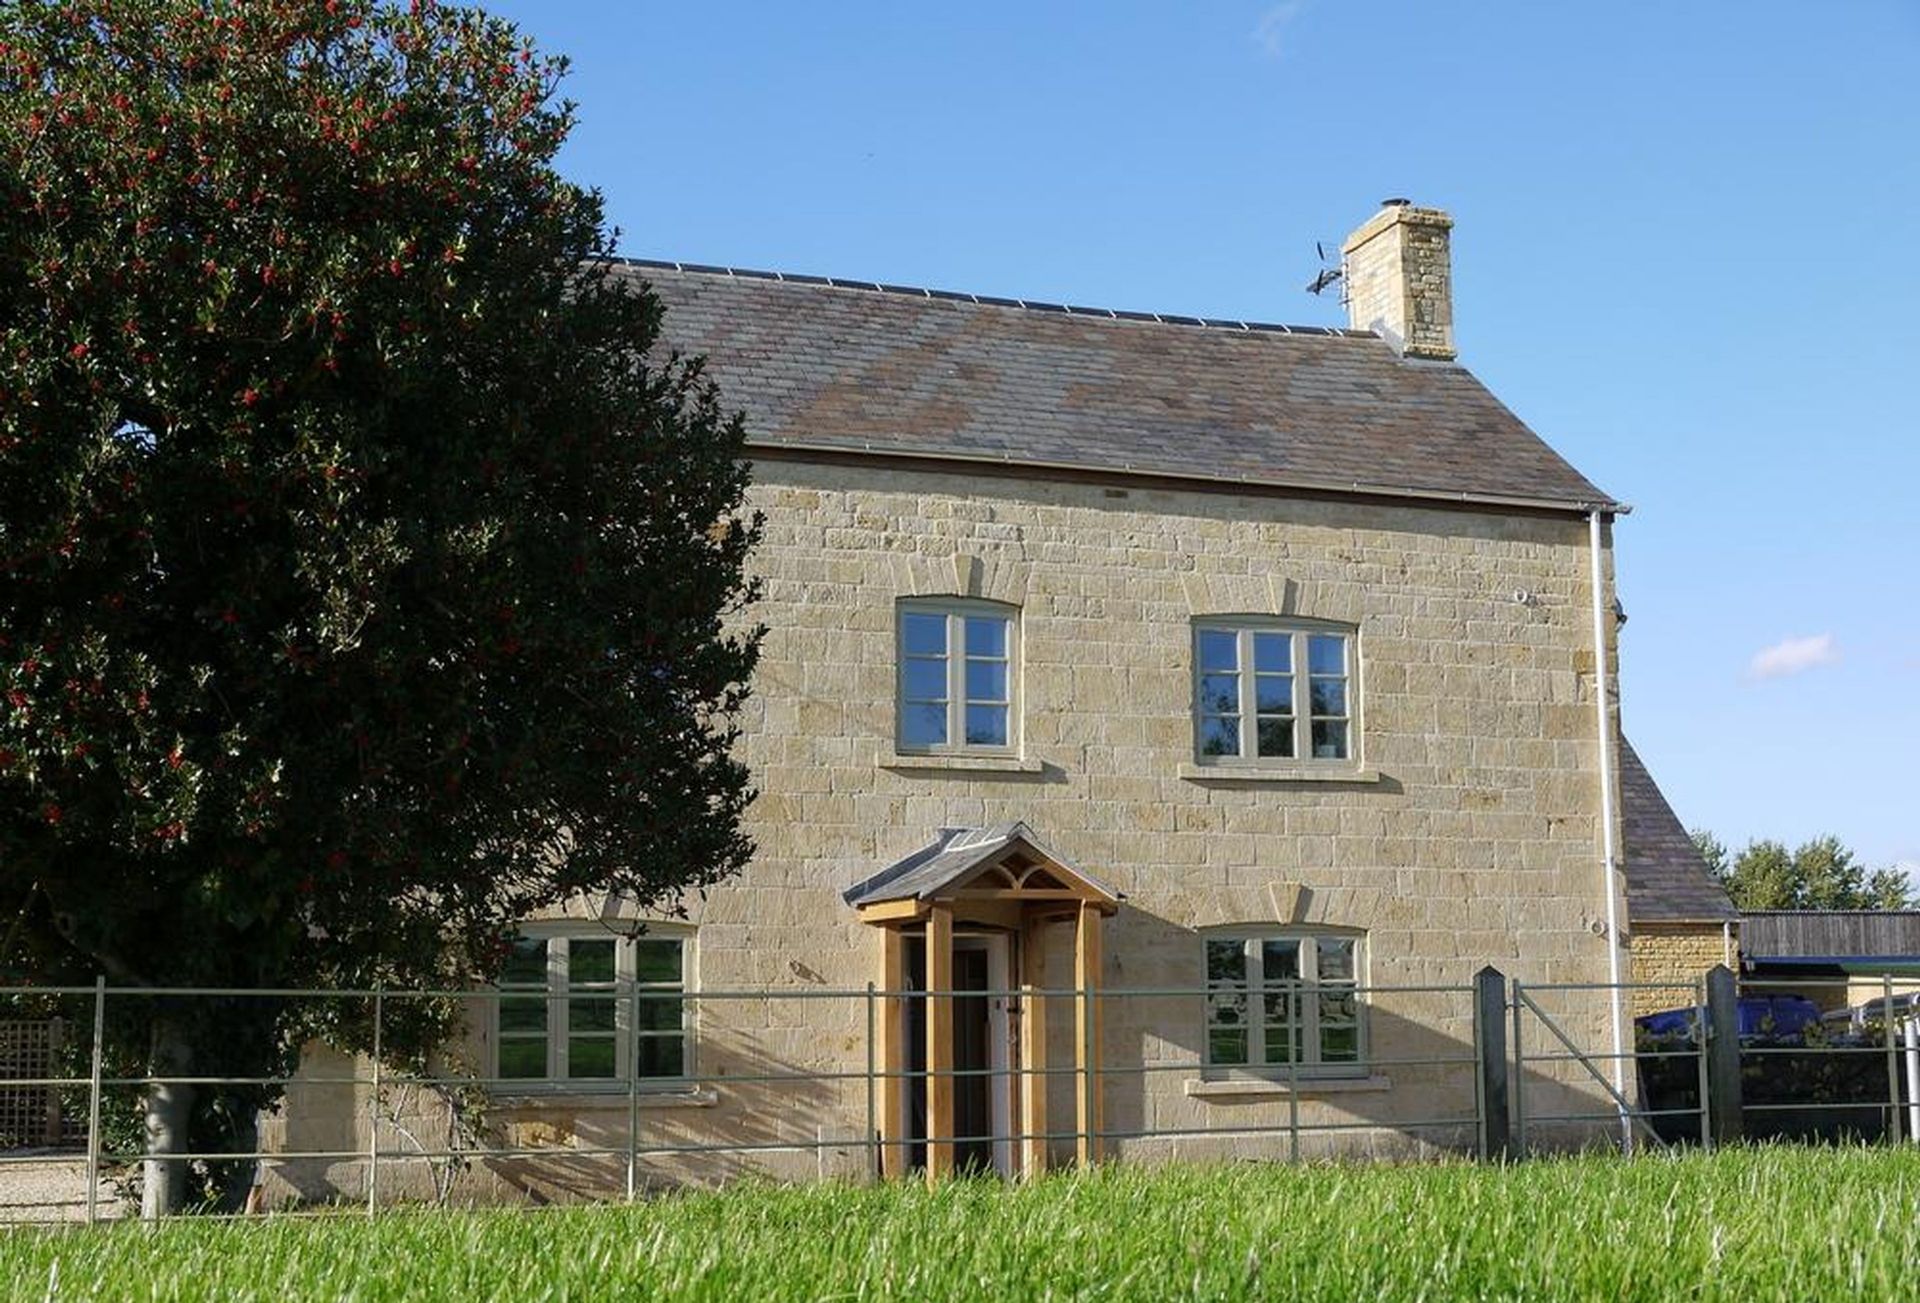 Details about a cottage Holiday at Lower Farmhouse